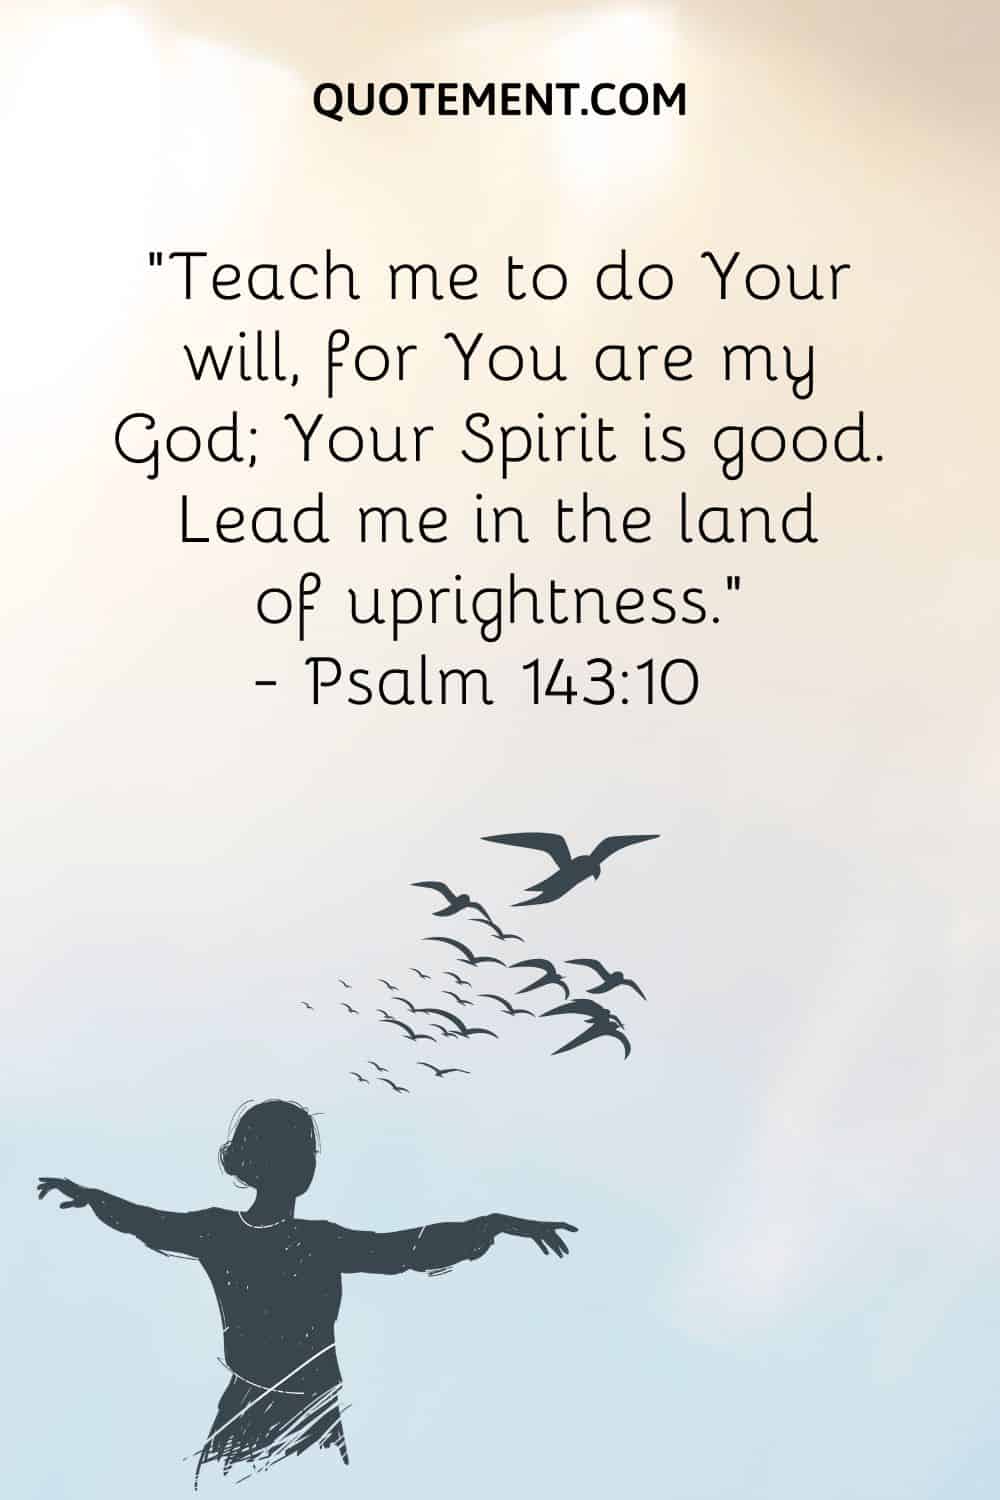 “Teach me to do Your will, for You are my God; Your Spirit is good. Lead me in the land of uprightness.” ― Psalm 14310